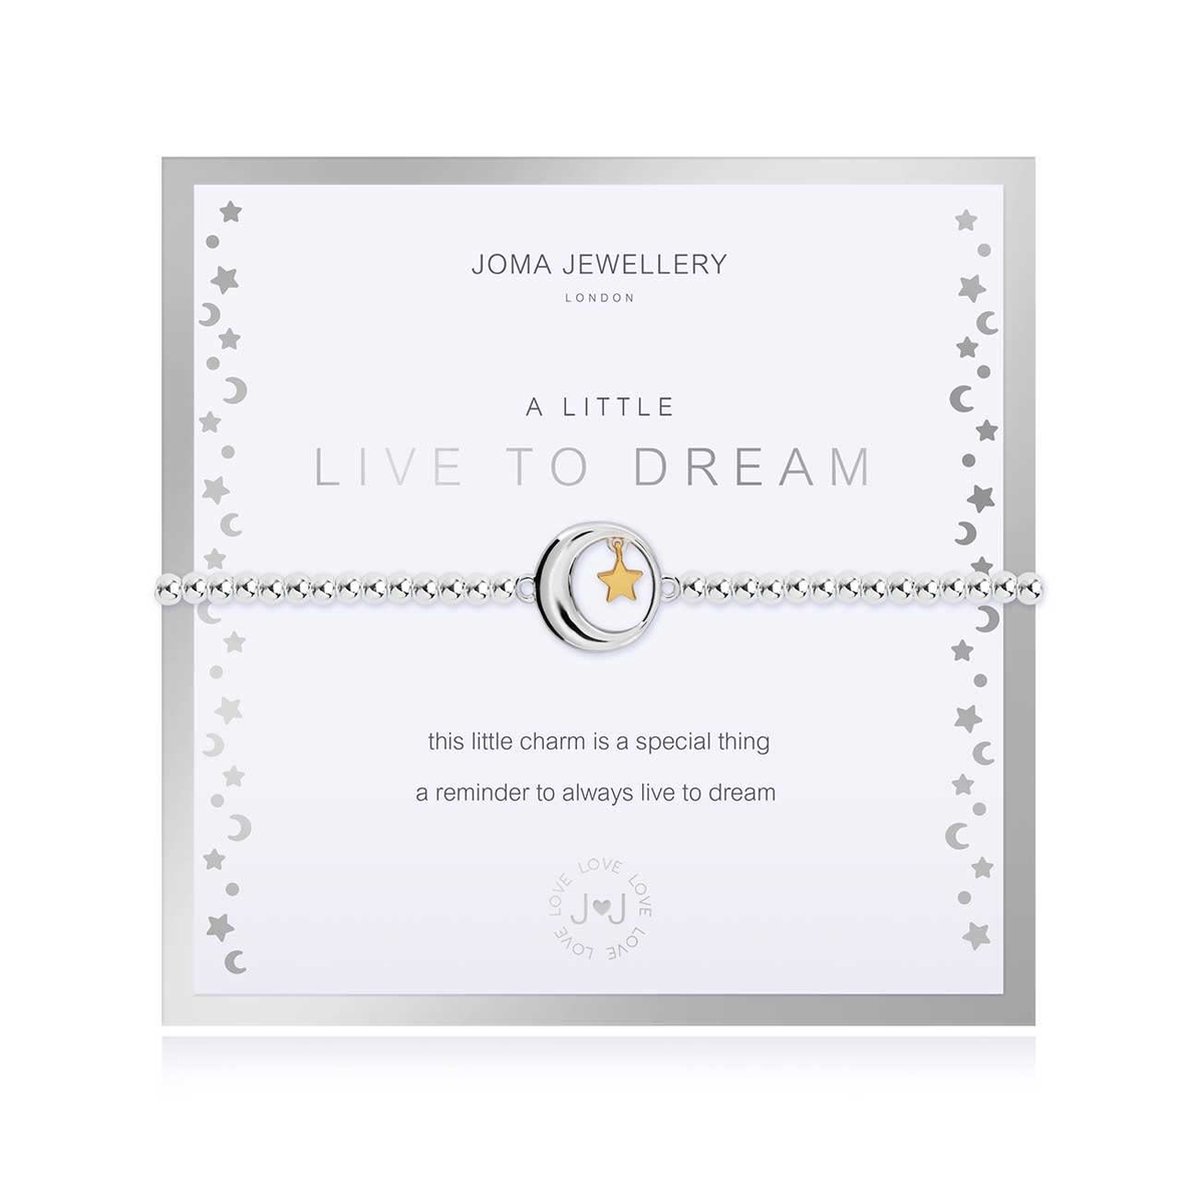 Joma Jewellery Boxed A Little - Live to Dream